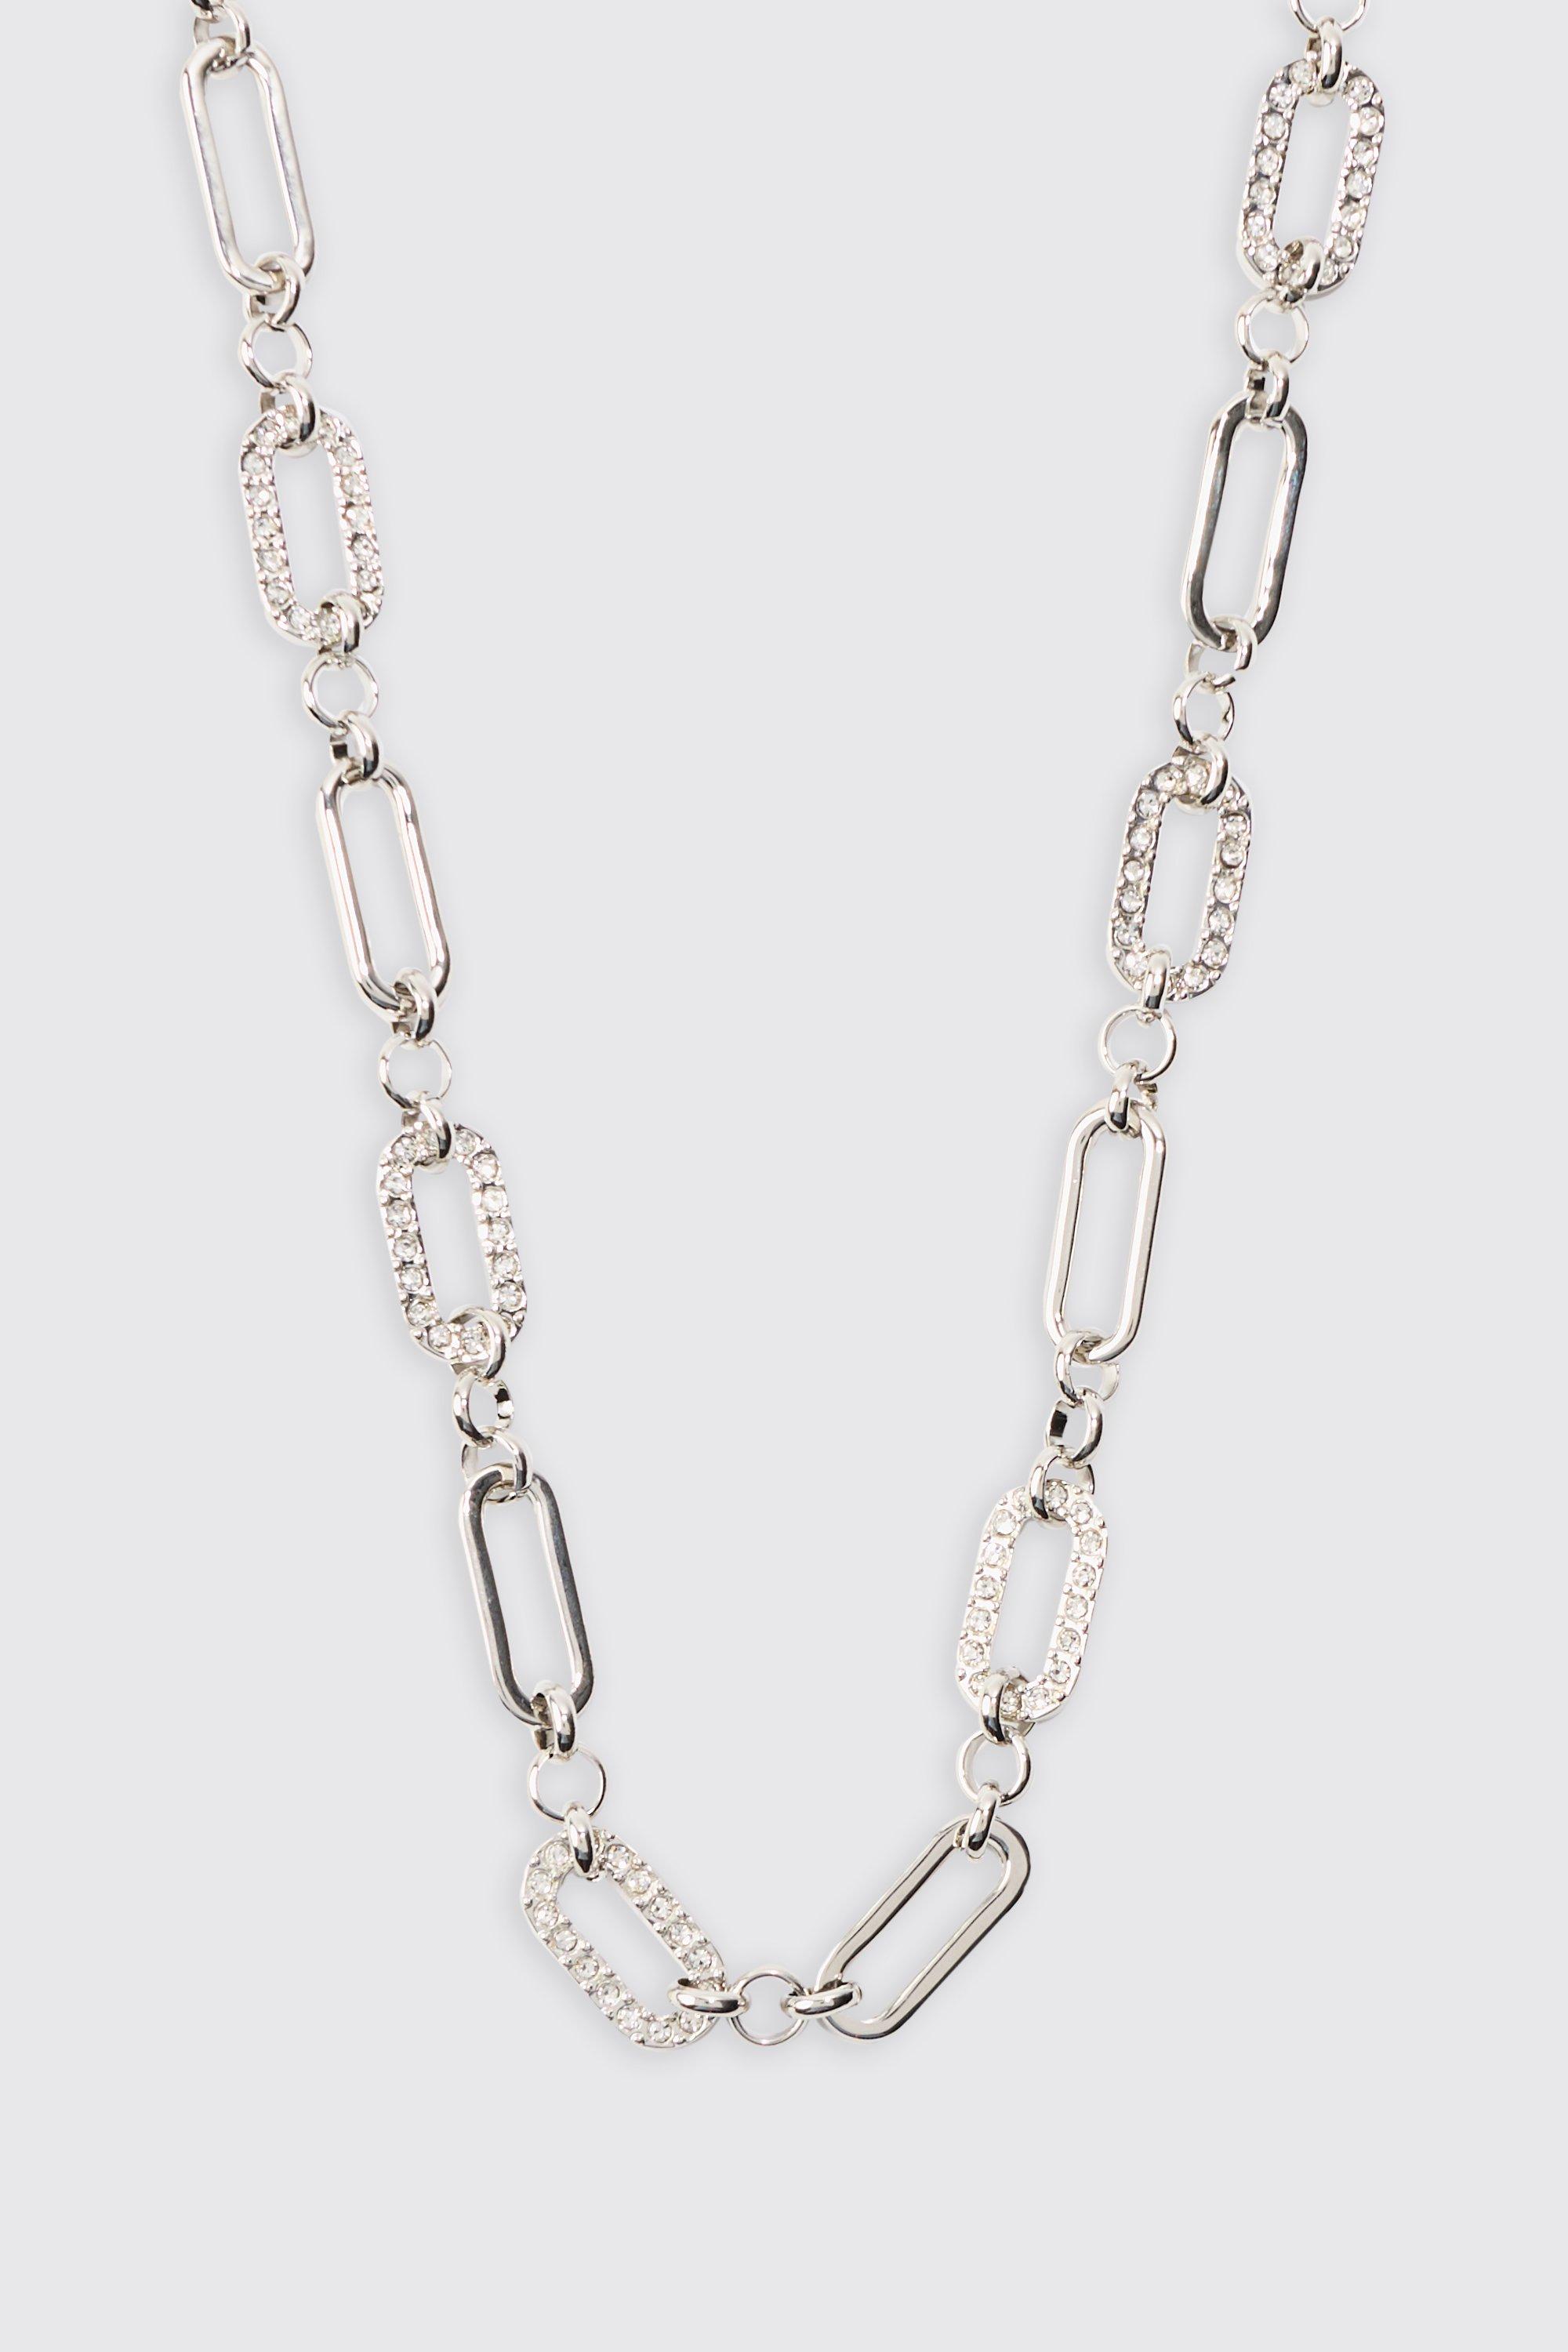 Image of Chain Link Necklace In Silver, Grigio